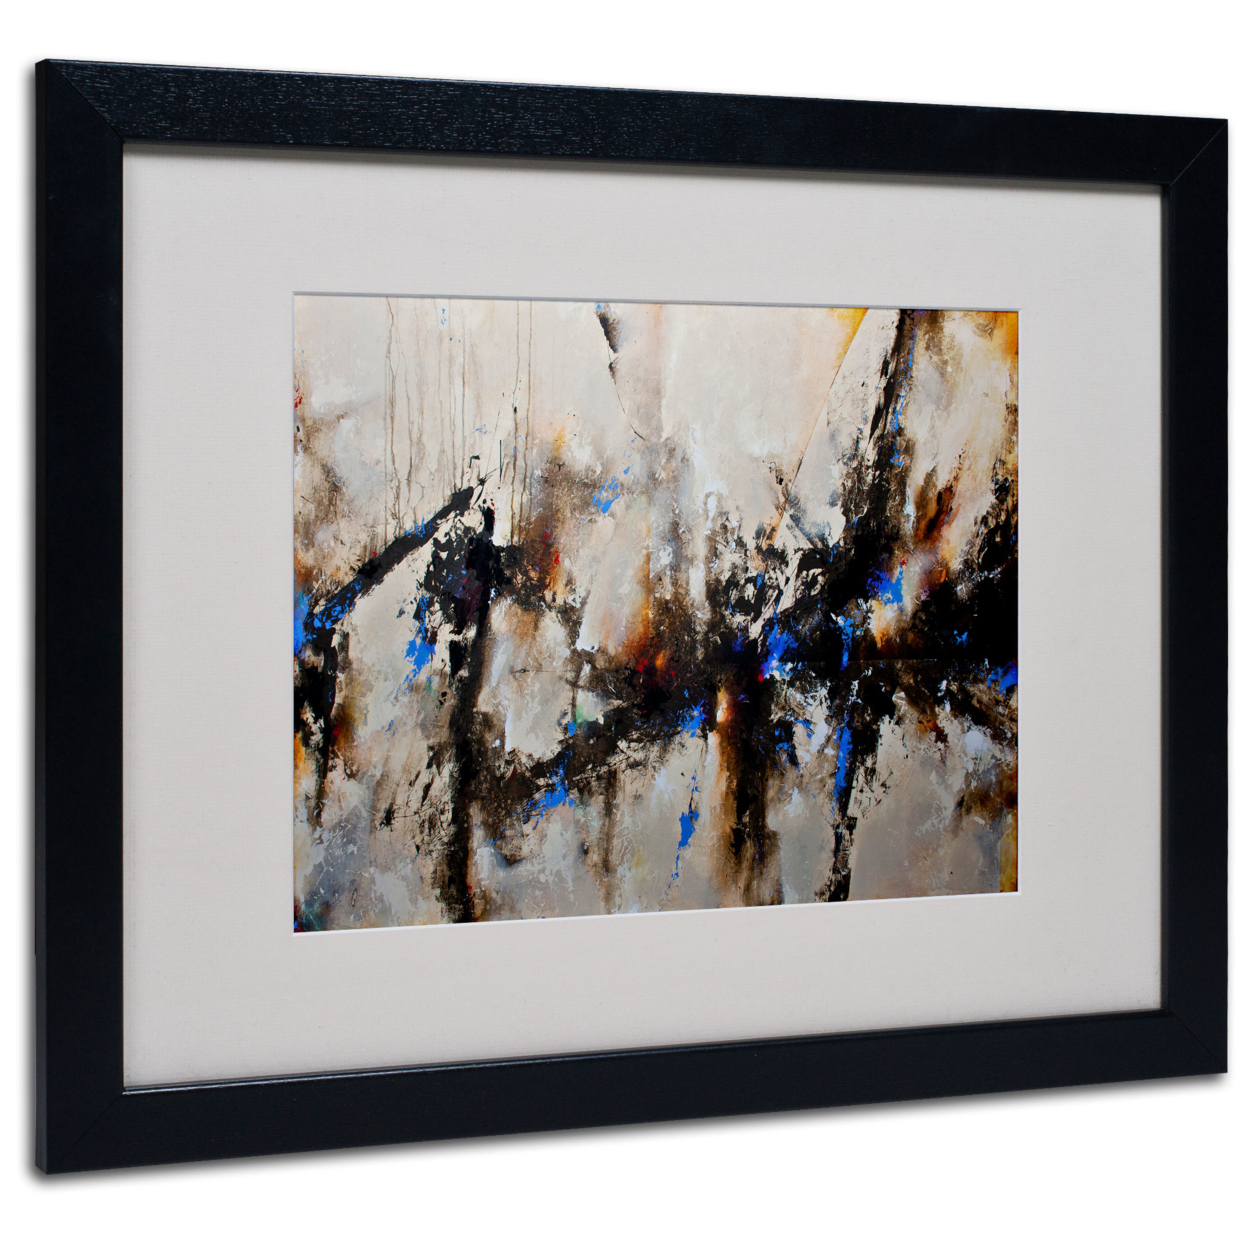 CH Studios 'Sands Of Time III' Black Wooden Framed Art 18 X 22 Inches